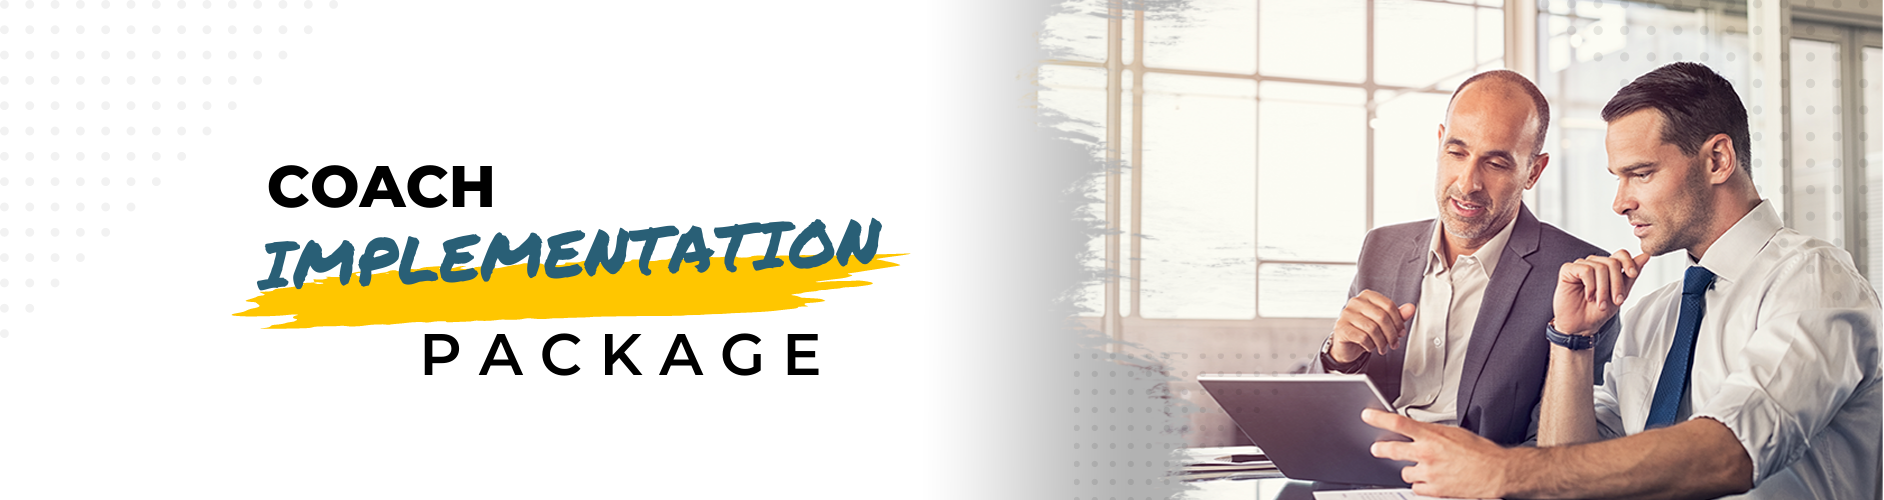 COACH implementation package banner